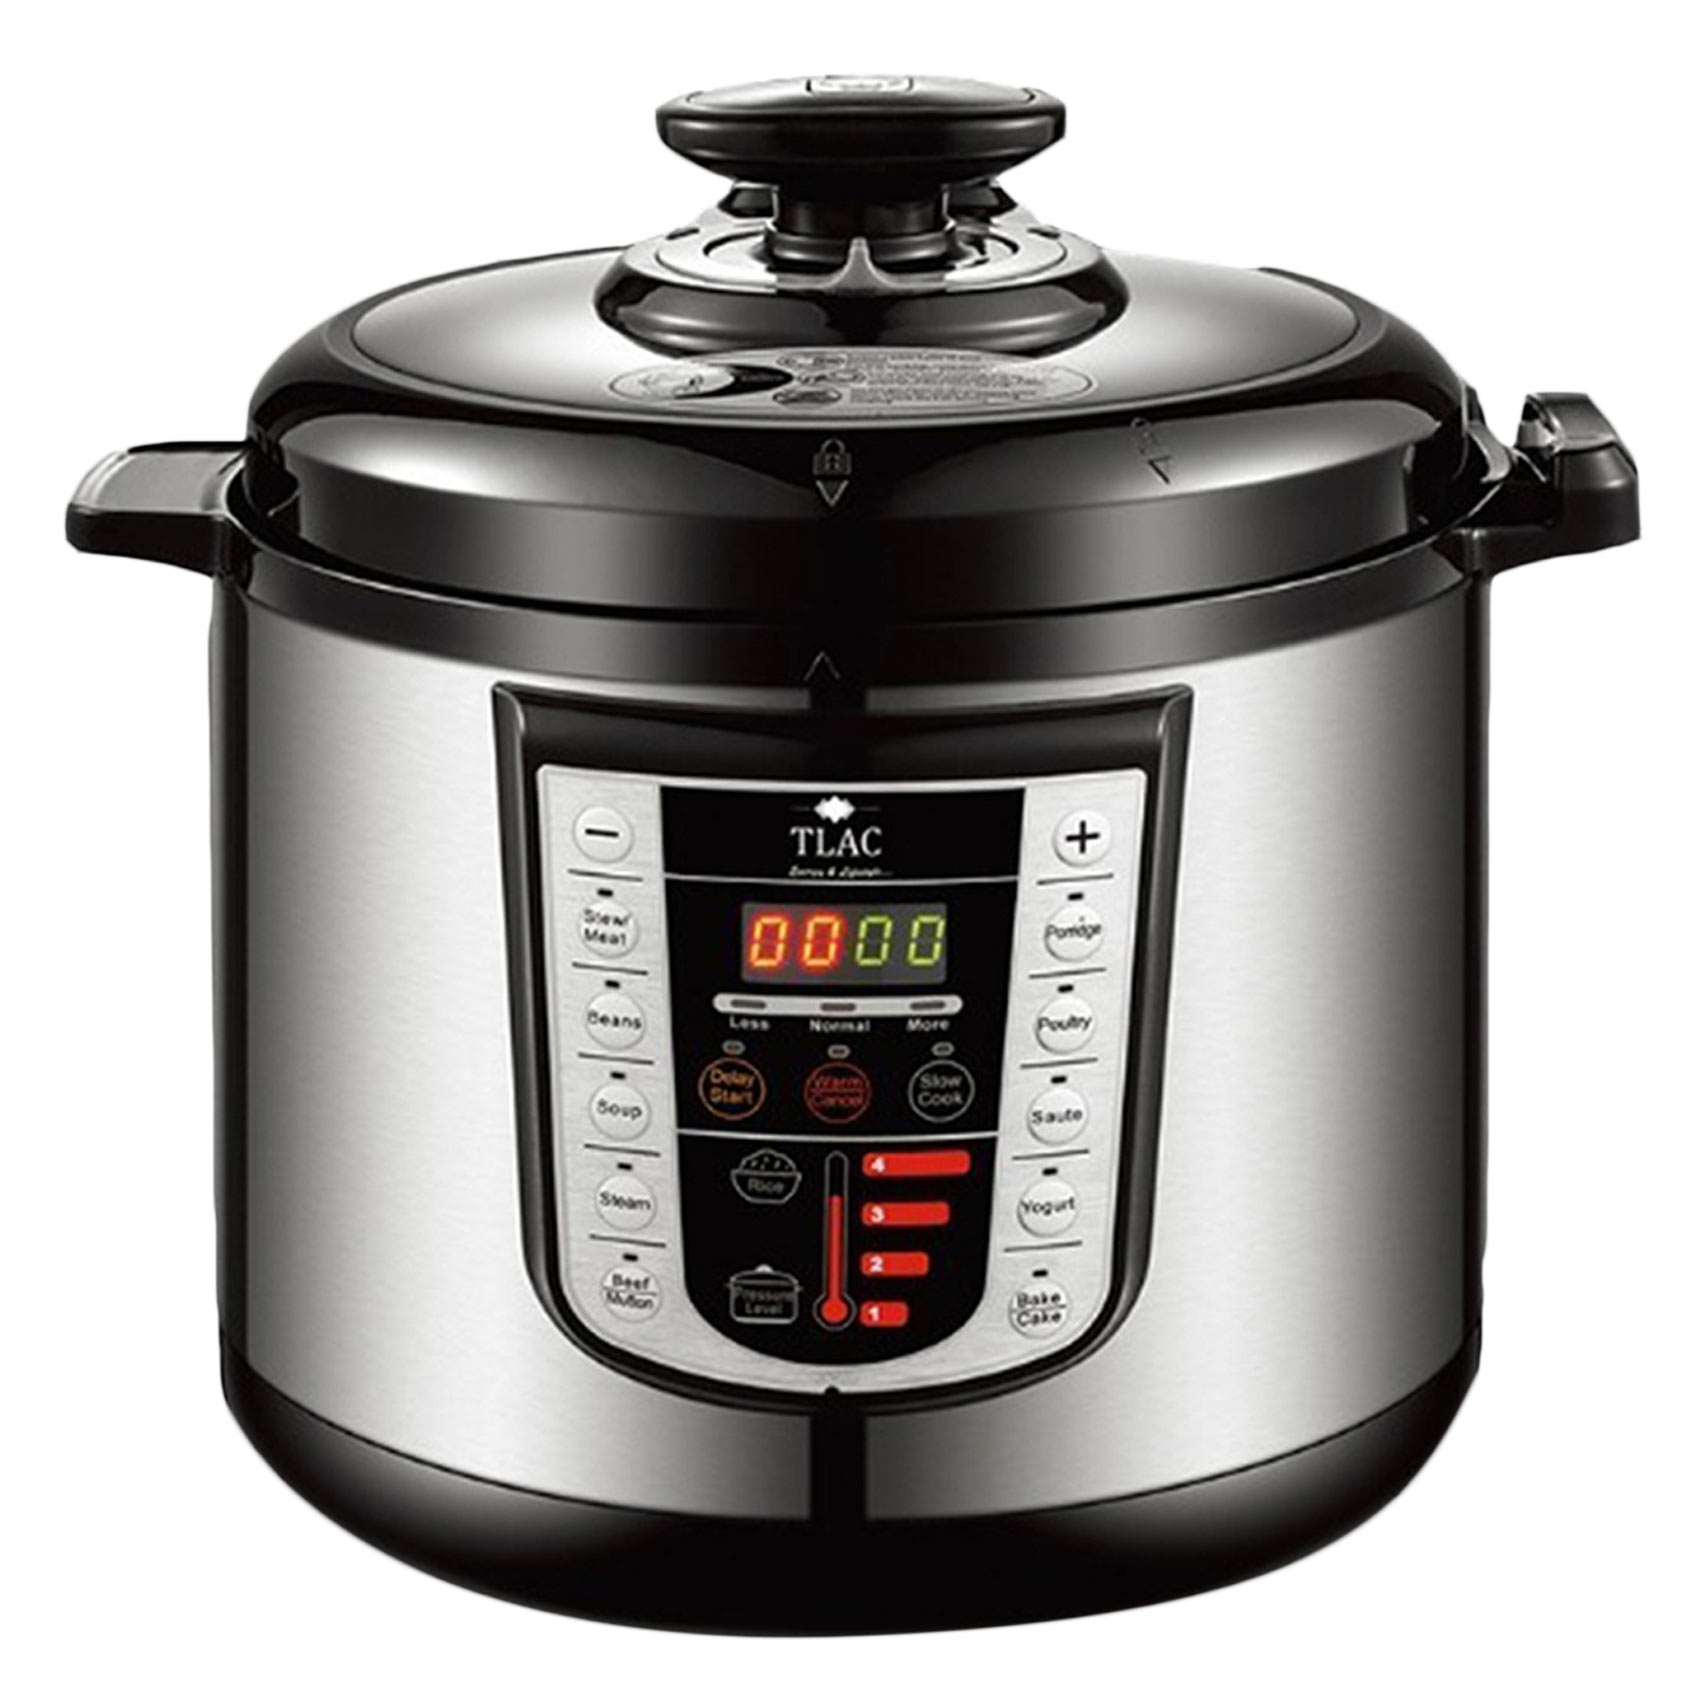 Tlac Electric Pressure Cooker 6 Ltr